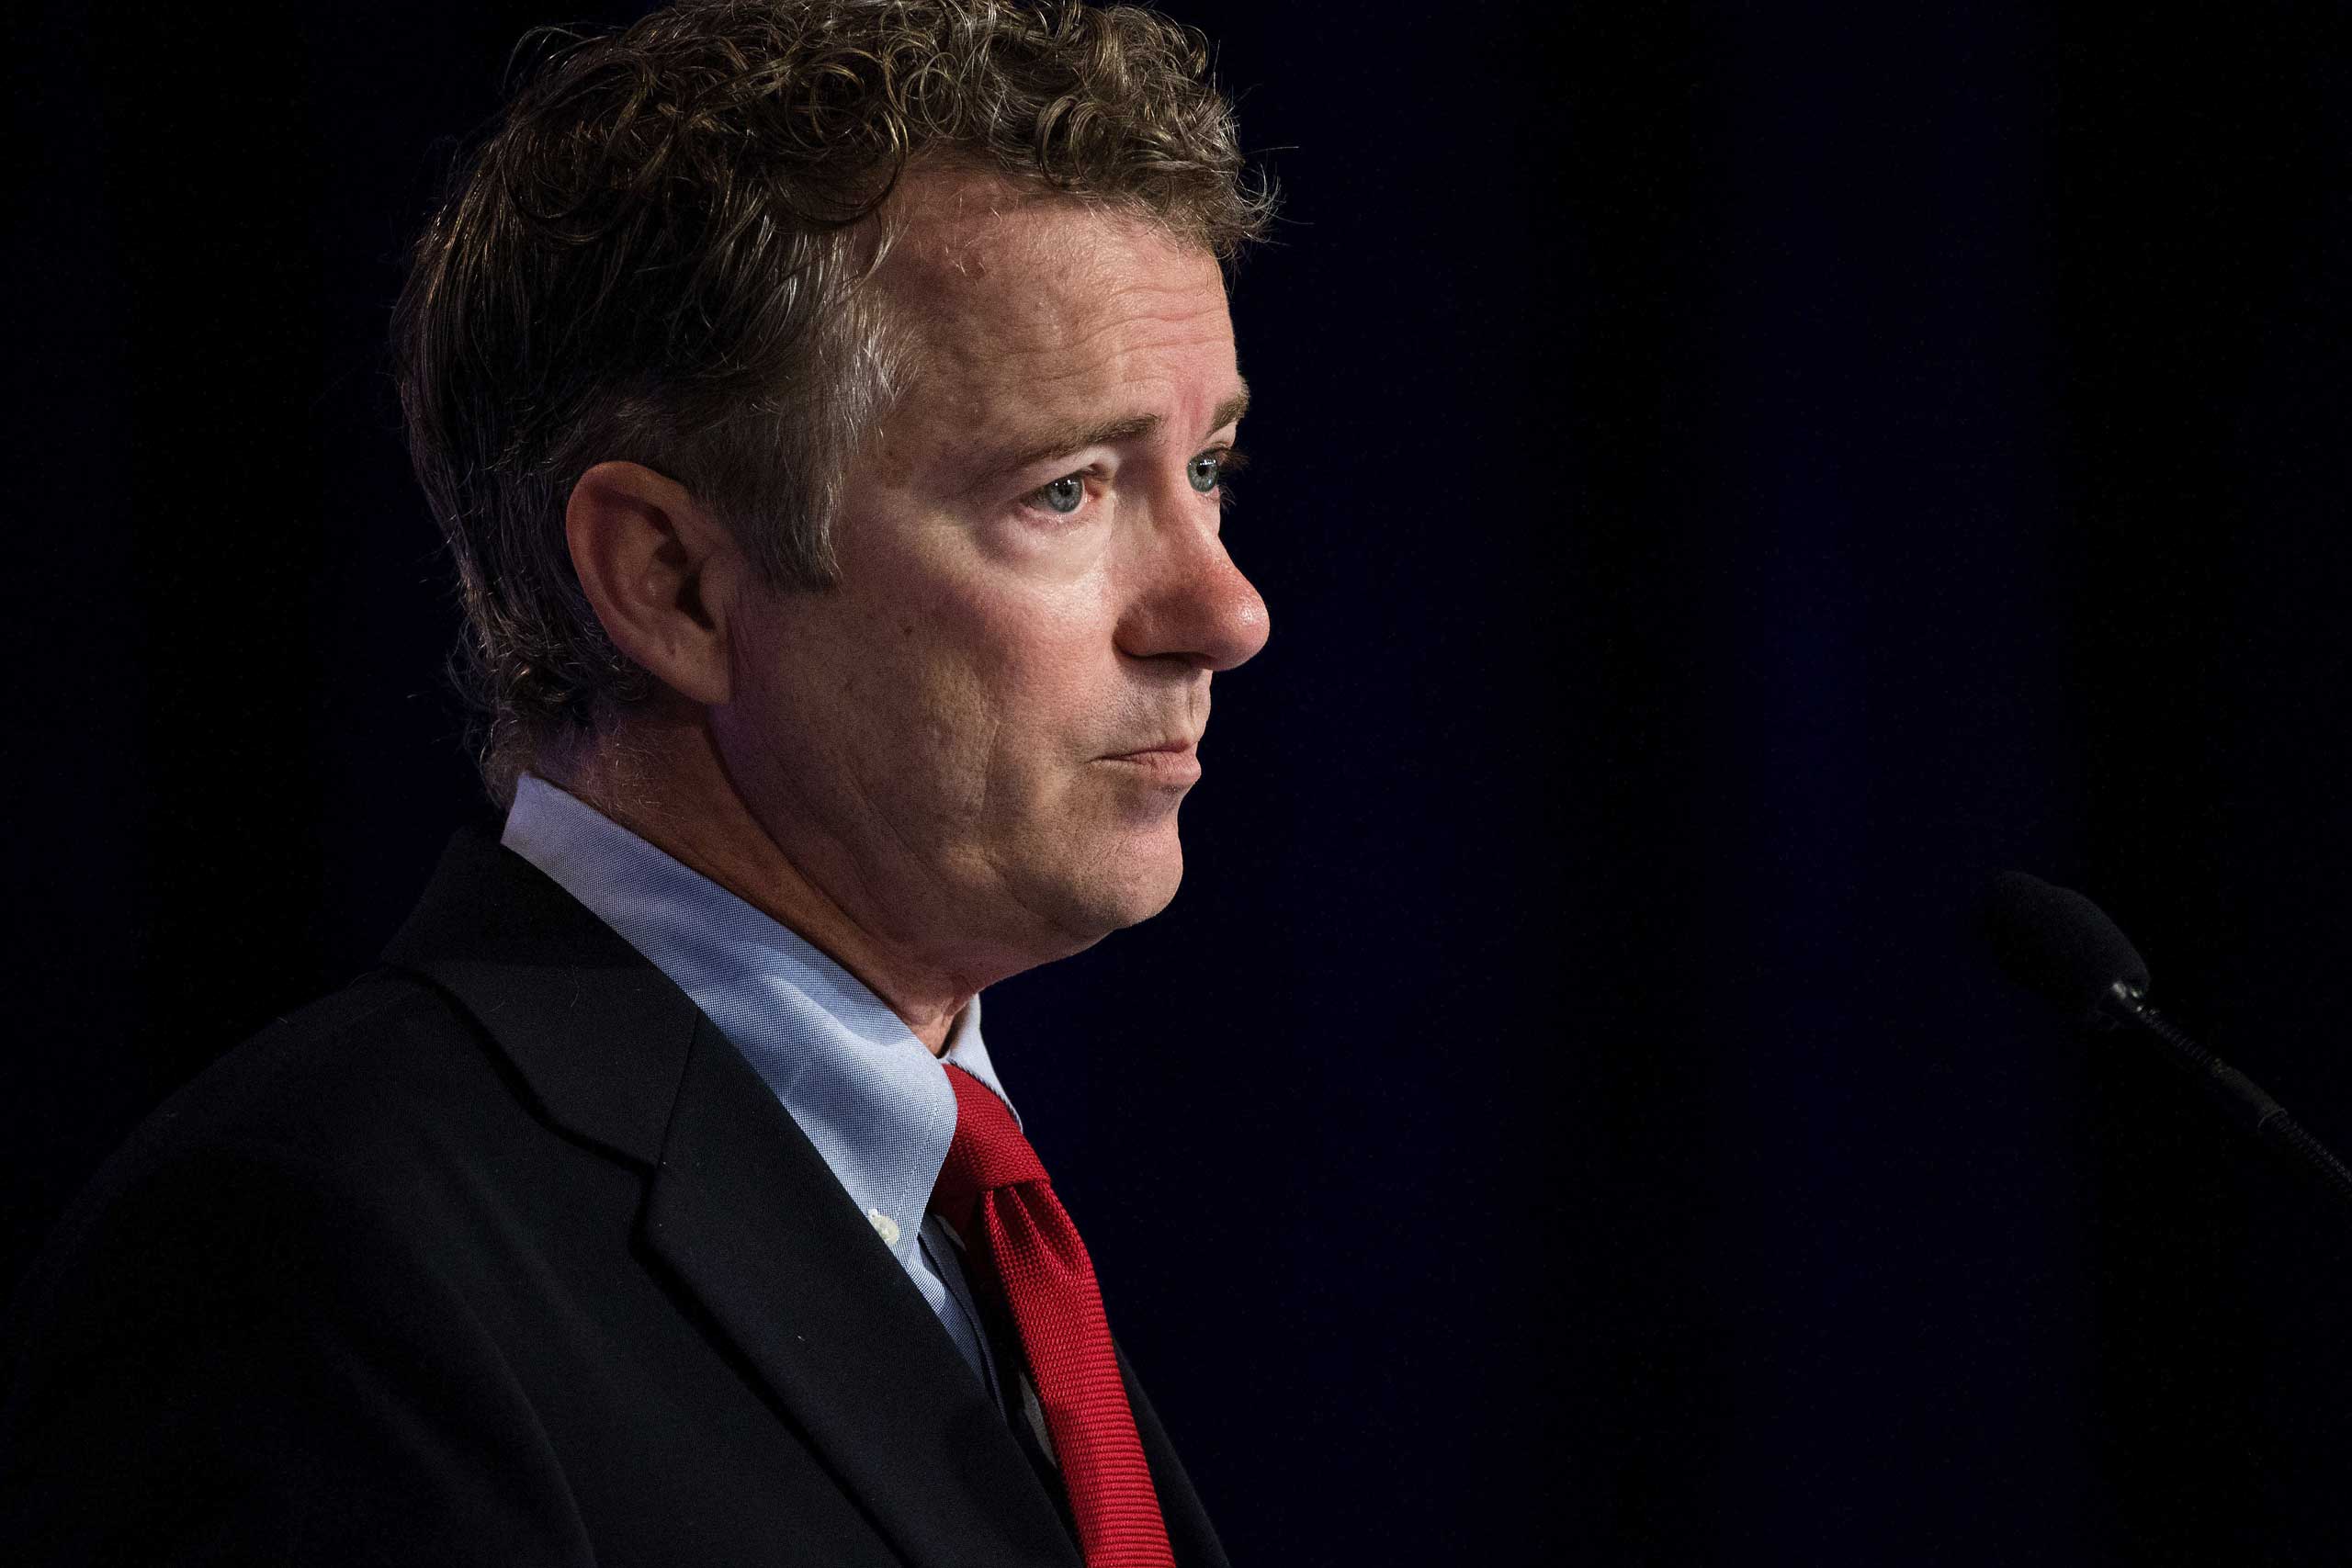 Sen. Rand Paul (R-Ky.) while speaking at the Values Voter Summit in Washington.